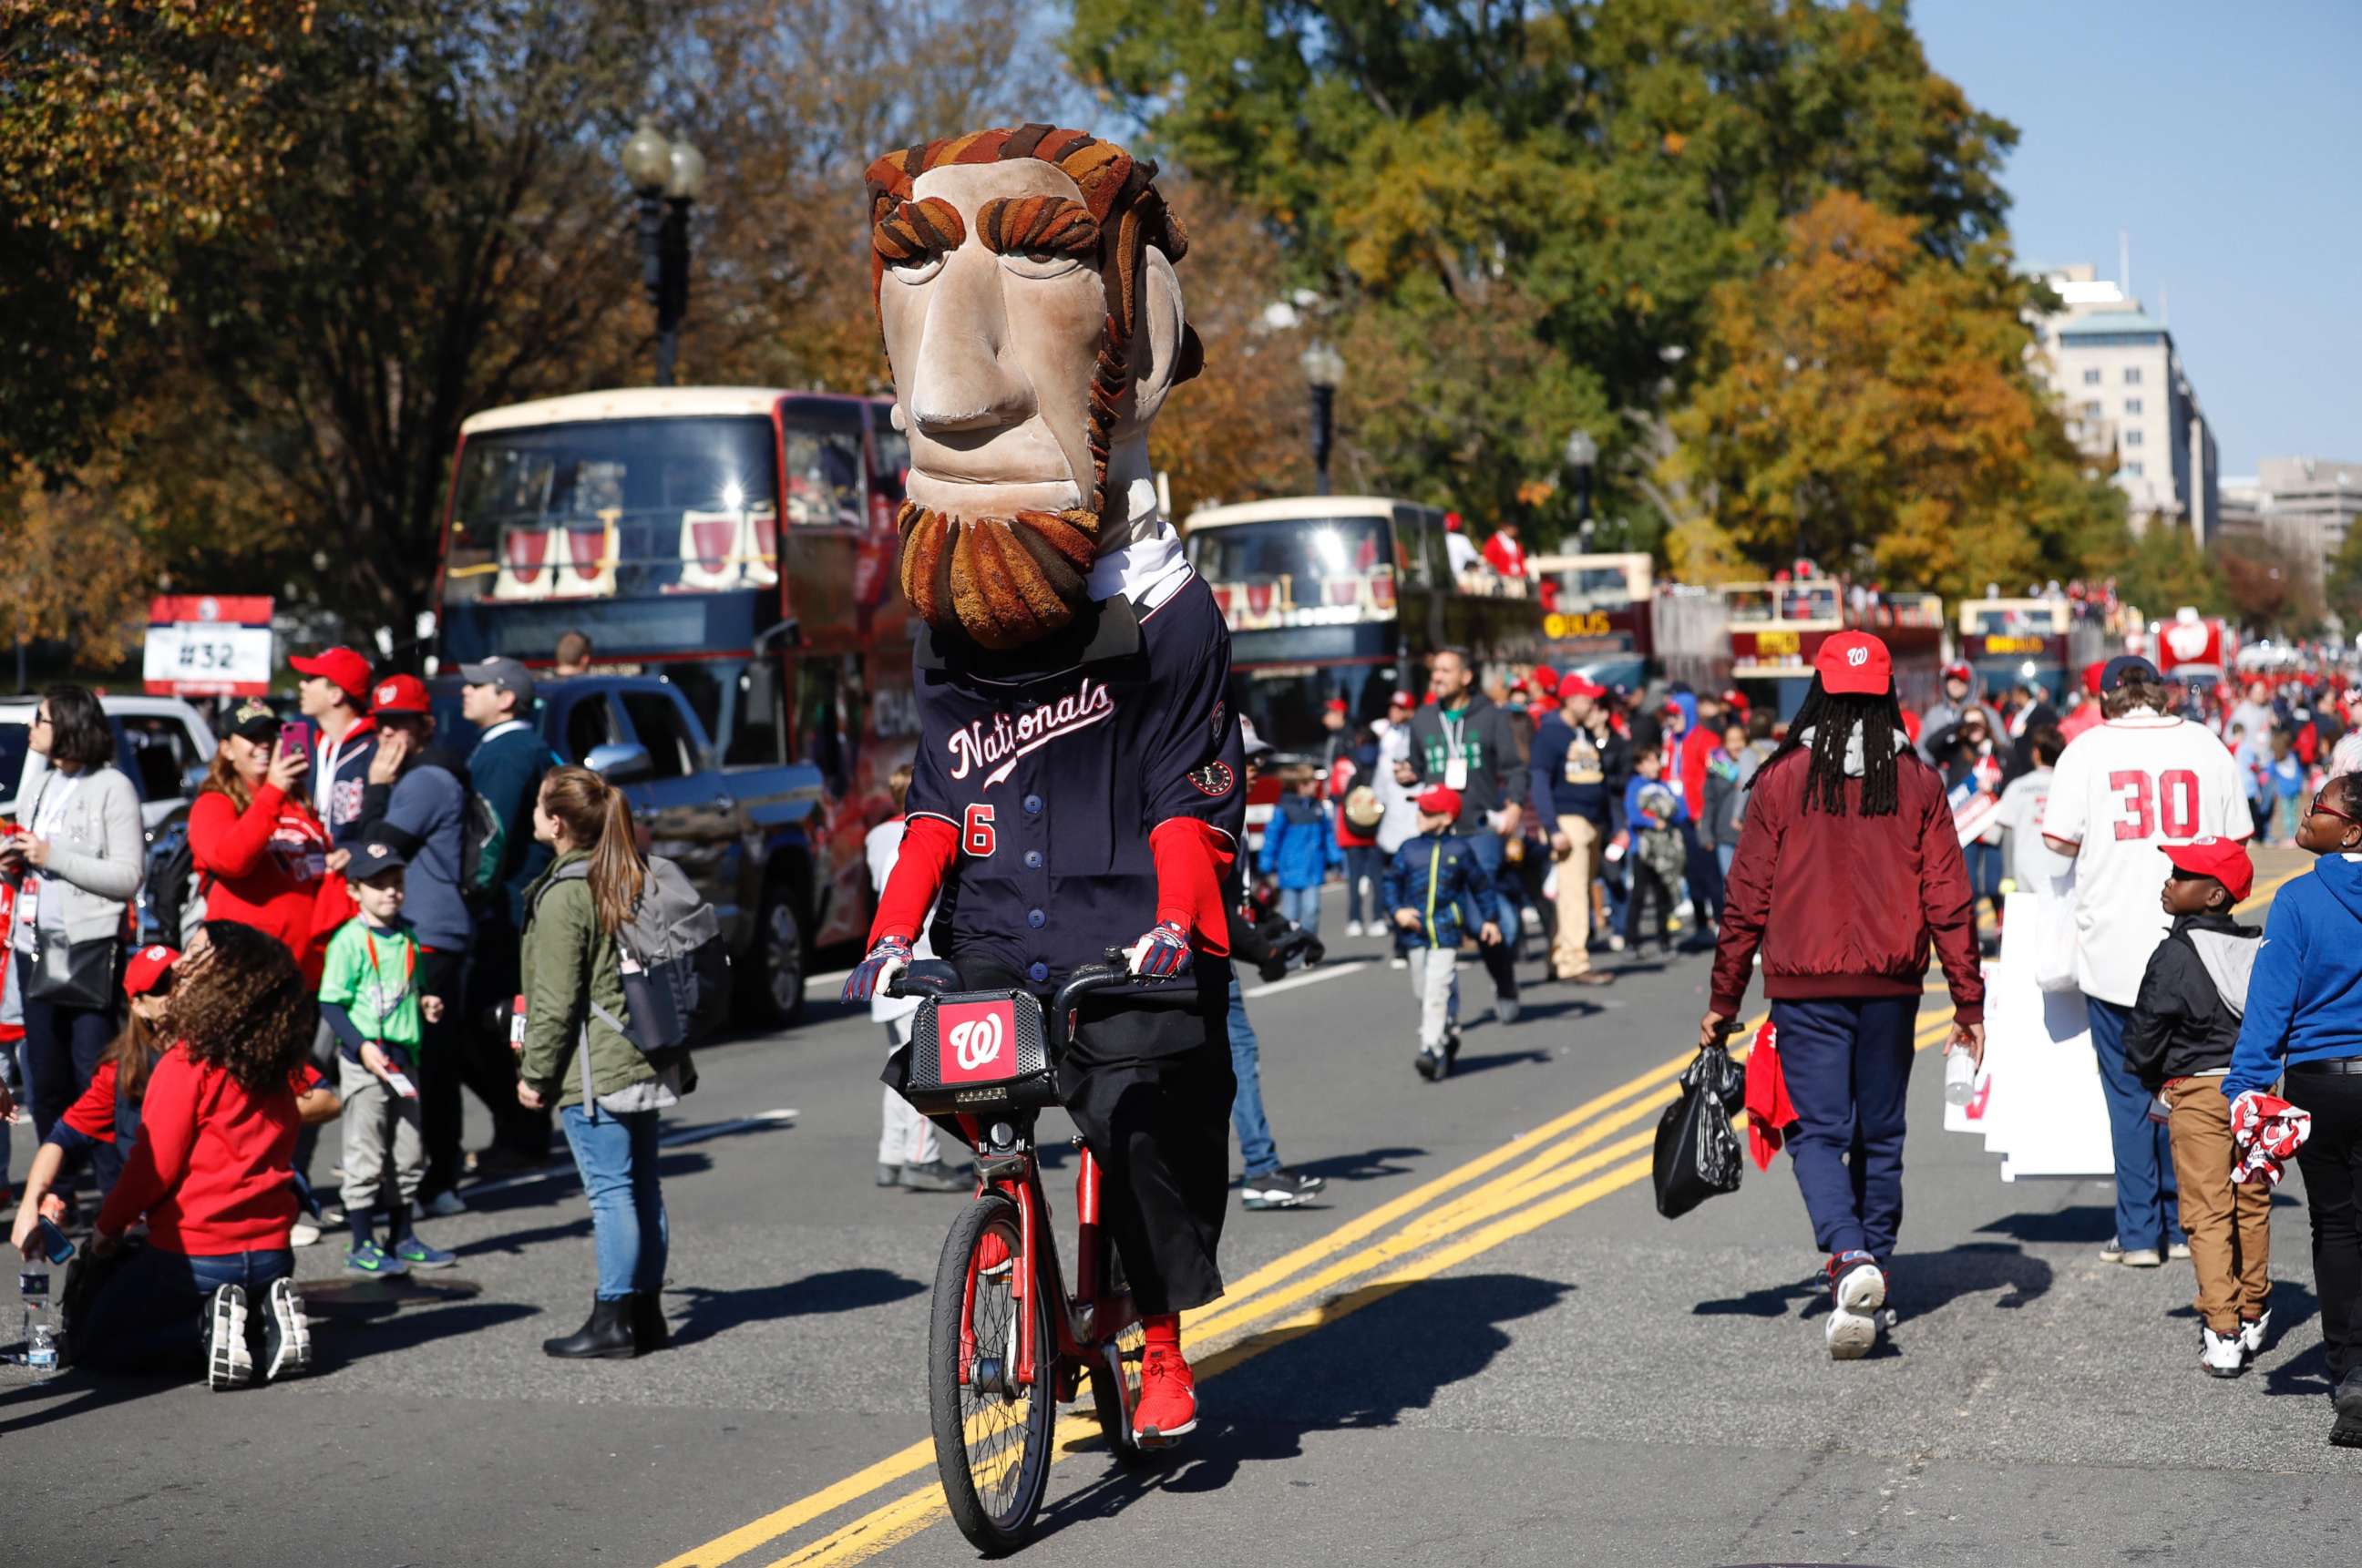 PHOTO: The Washington Nationals president mascot rides a bike before the start of the World Series championship parade in downtown Washington, DC.